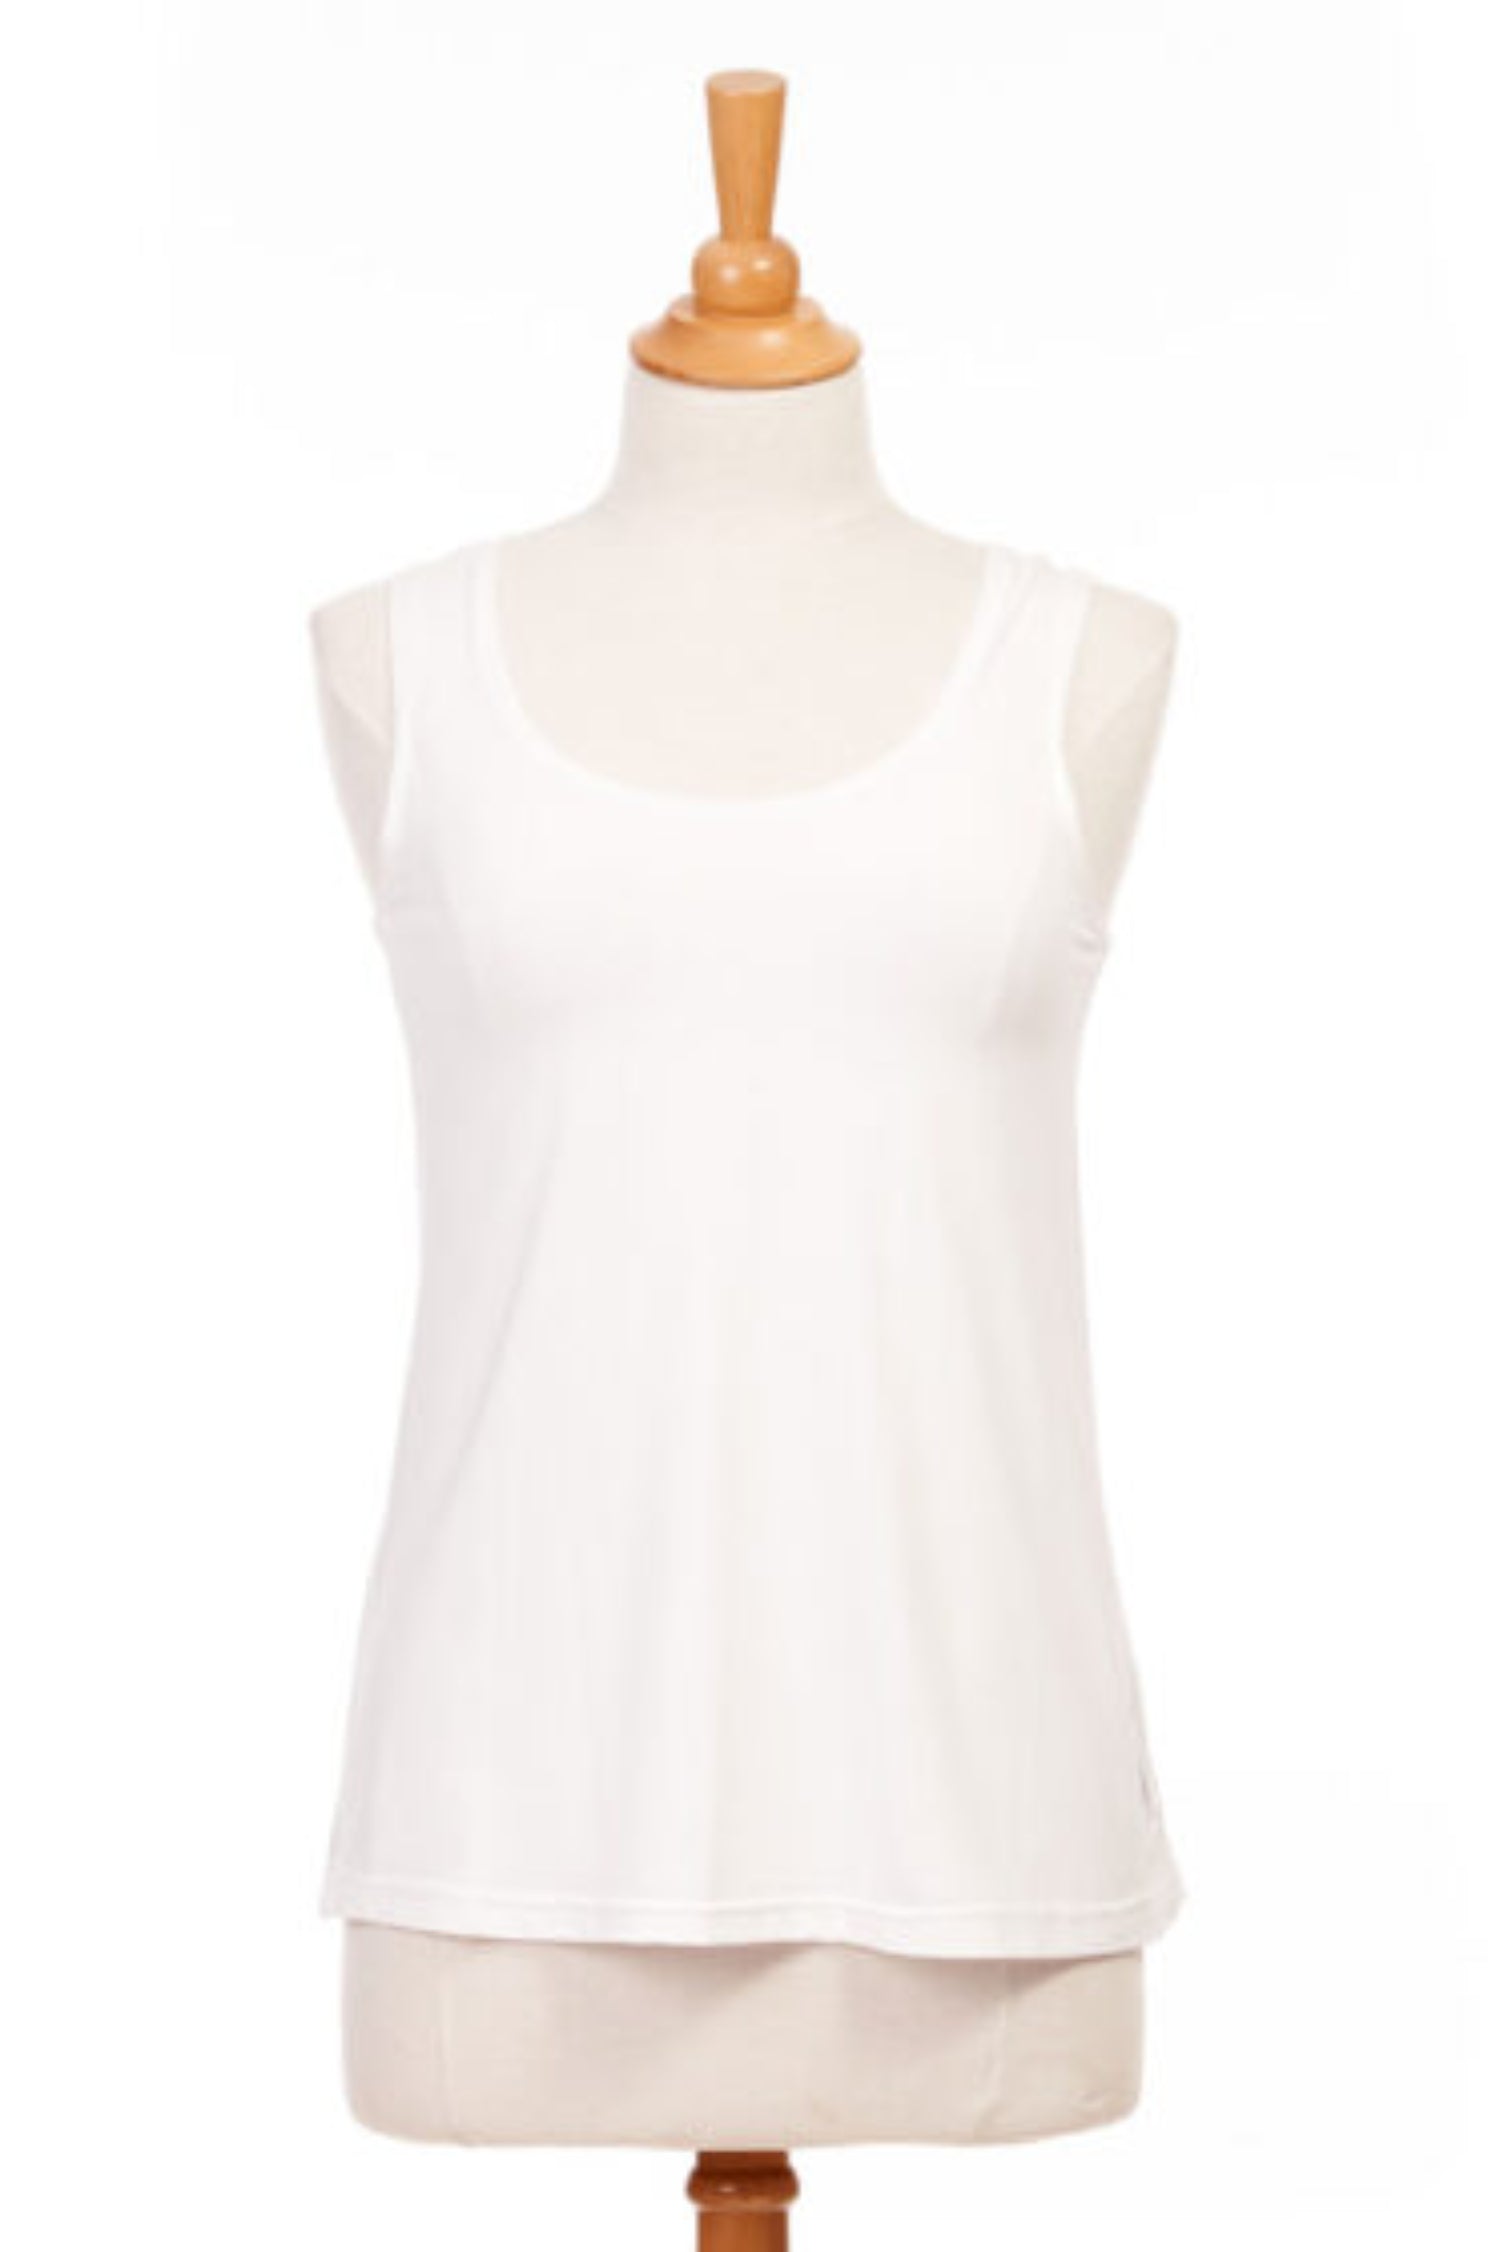 Reversible Camisole by Rien ne se Perd, White, scoop-neck view, sizes XS to XXL, made in Quebec